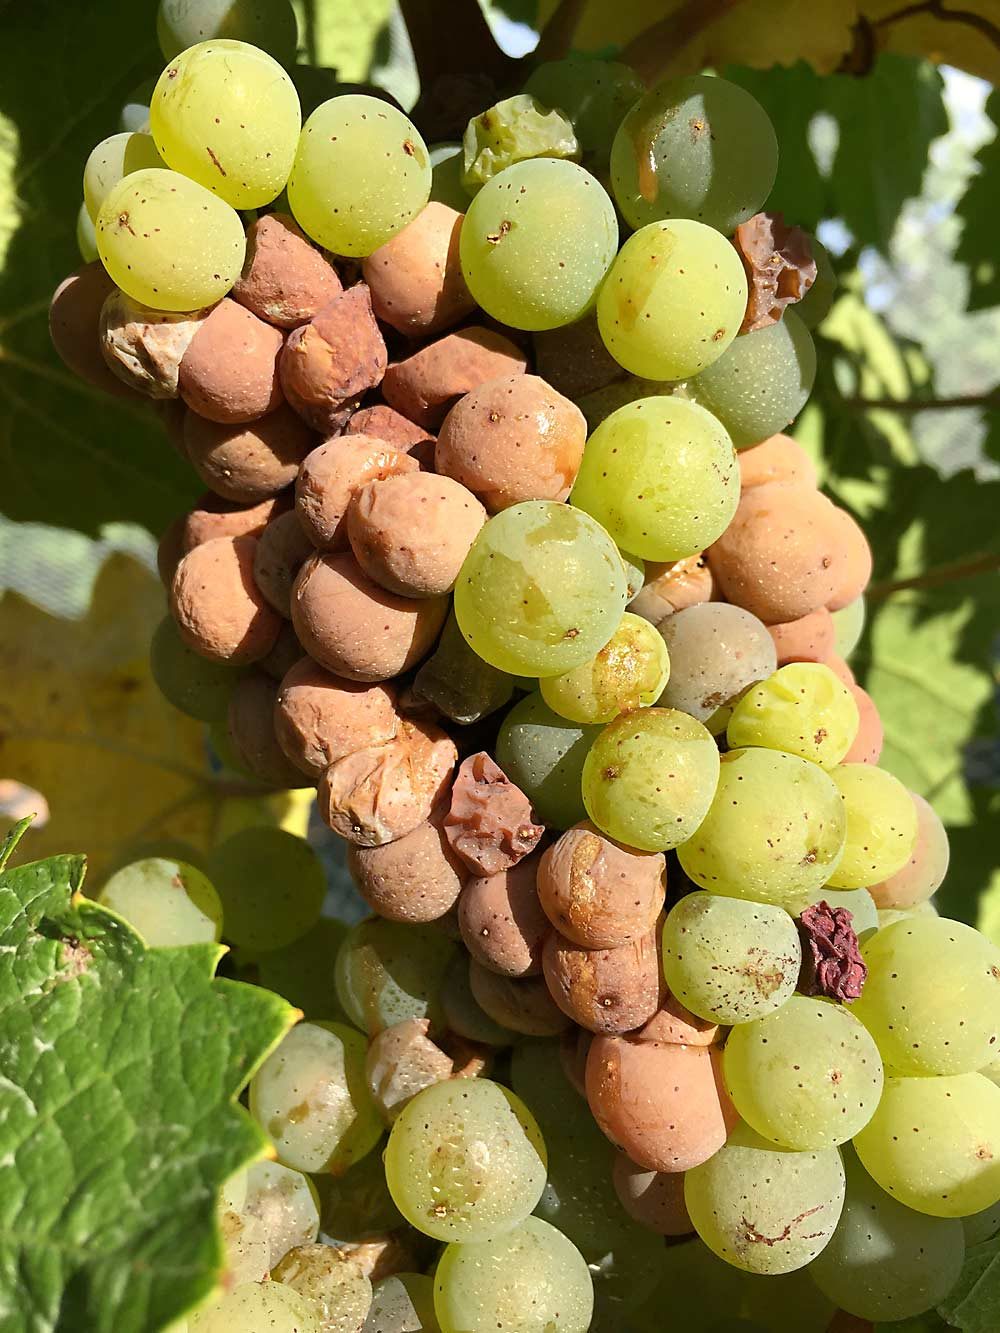 Grapes hit by sour rot turn brown and become vinegary. Recent research is shedding light on this previously little-understood disease, which is all too common in cooler climate wine growing regions of the world. (Courtesy Megan Hall/University of Missouri)